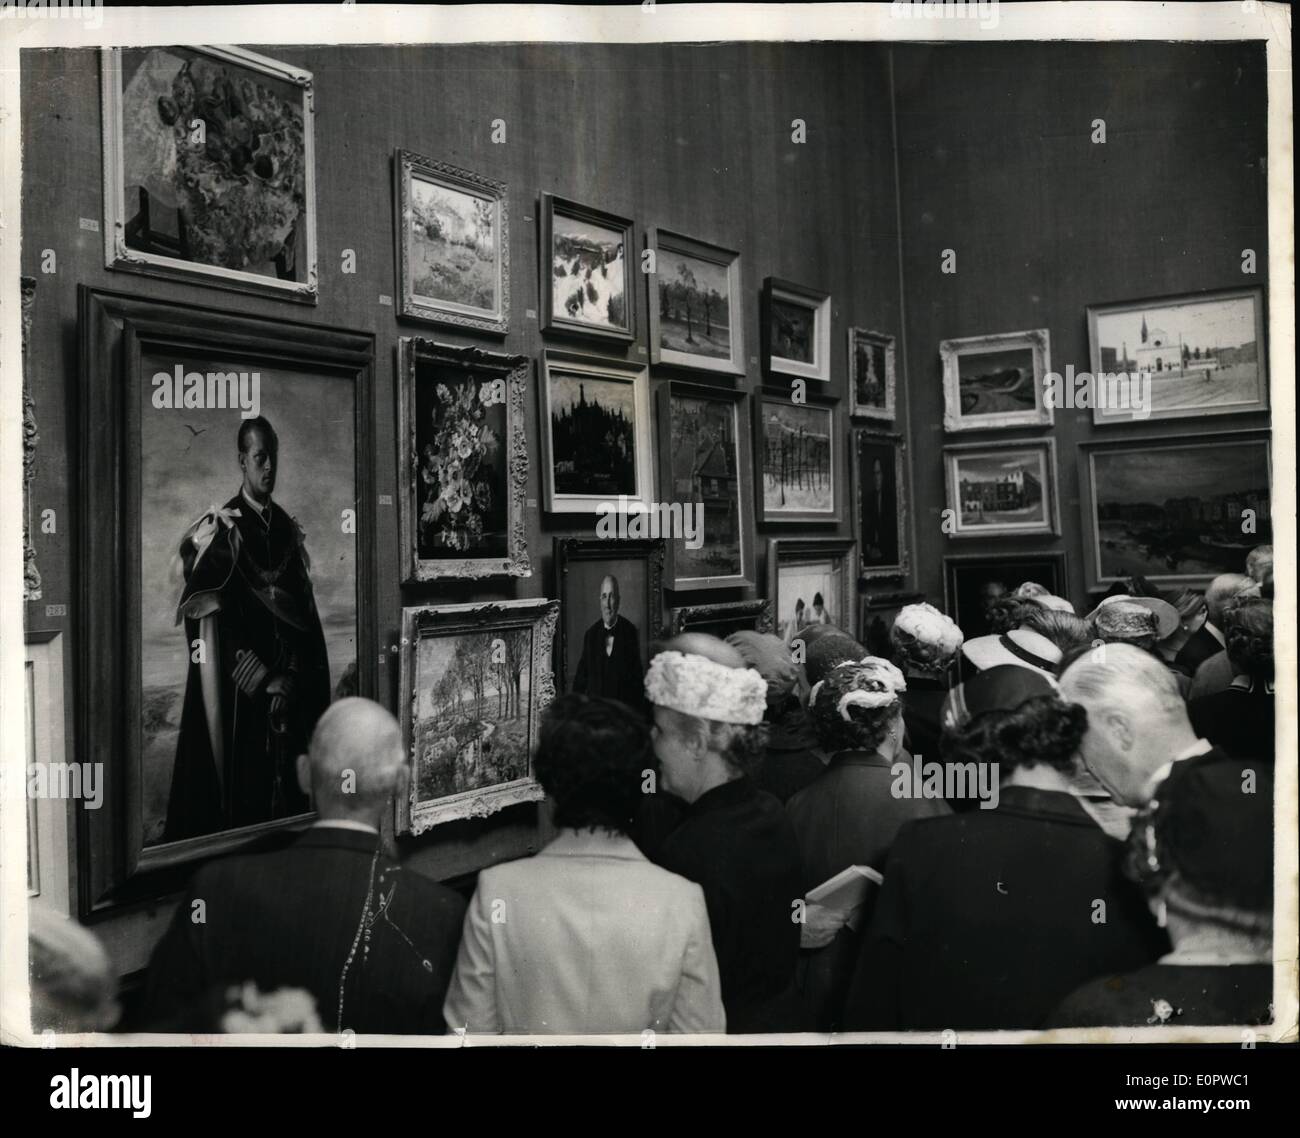 Mar. 03, 1957 - Private view Royal Academy summer exhibition Duke of Edinburgh's Portrait; Photo Shows General view as onlookers admire the Annigoni painting of the Duke of Edinburgh the painting that is expected to create plenty of controversy at the Private view this morning. Stock Photo